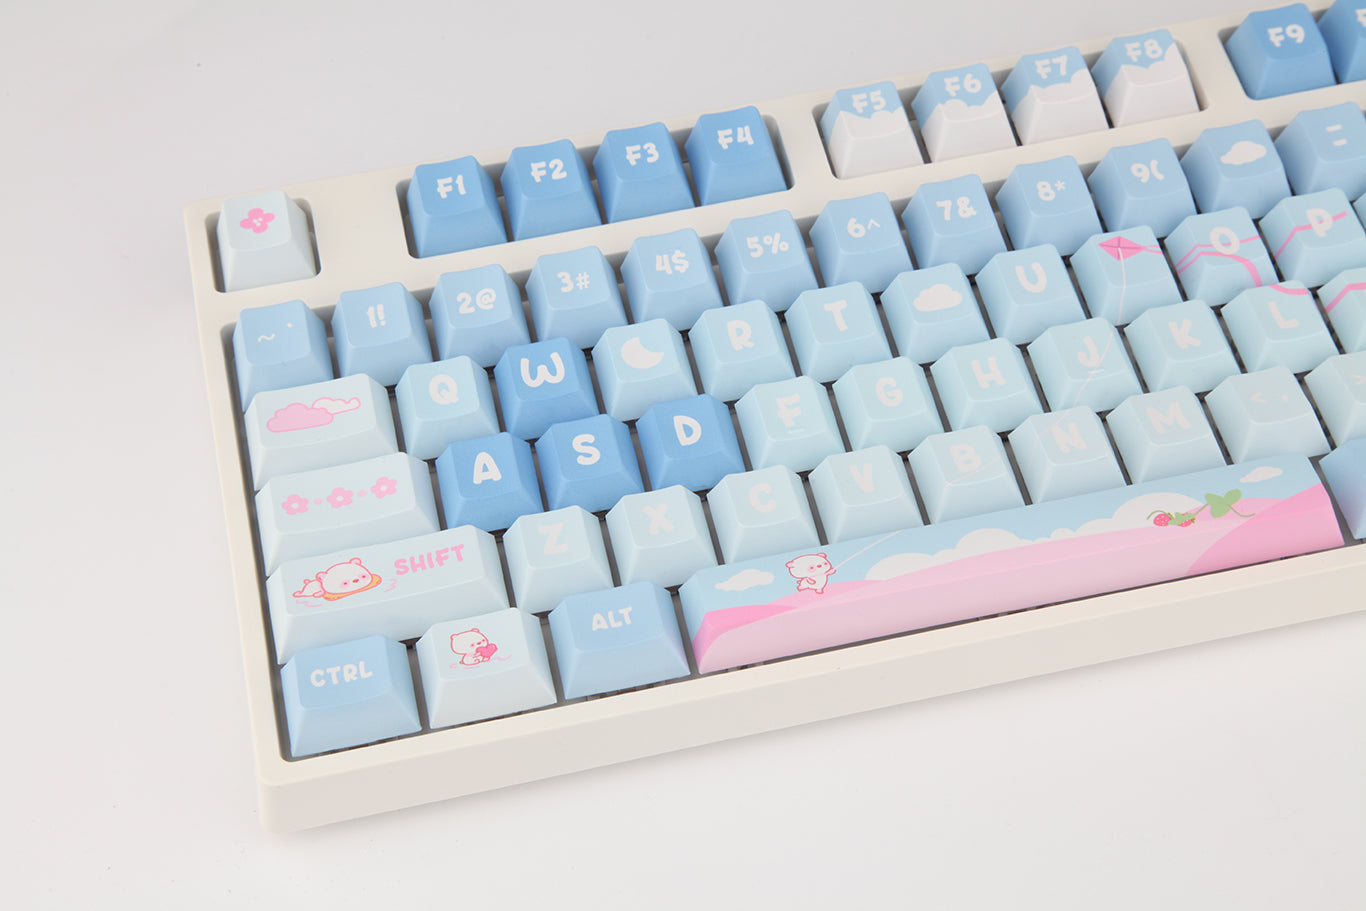 PERSONALIZE YOUR KEYBOARD WITH UNIQUE KEYCAP SETS